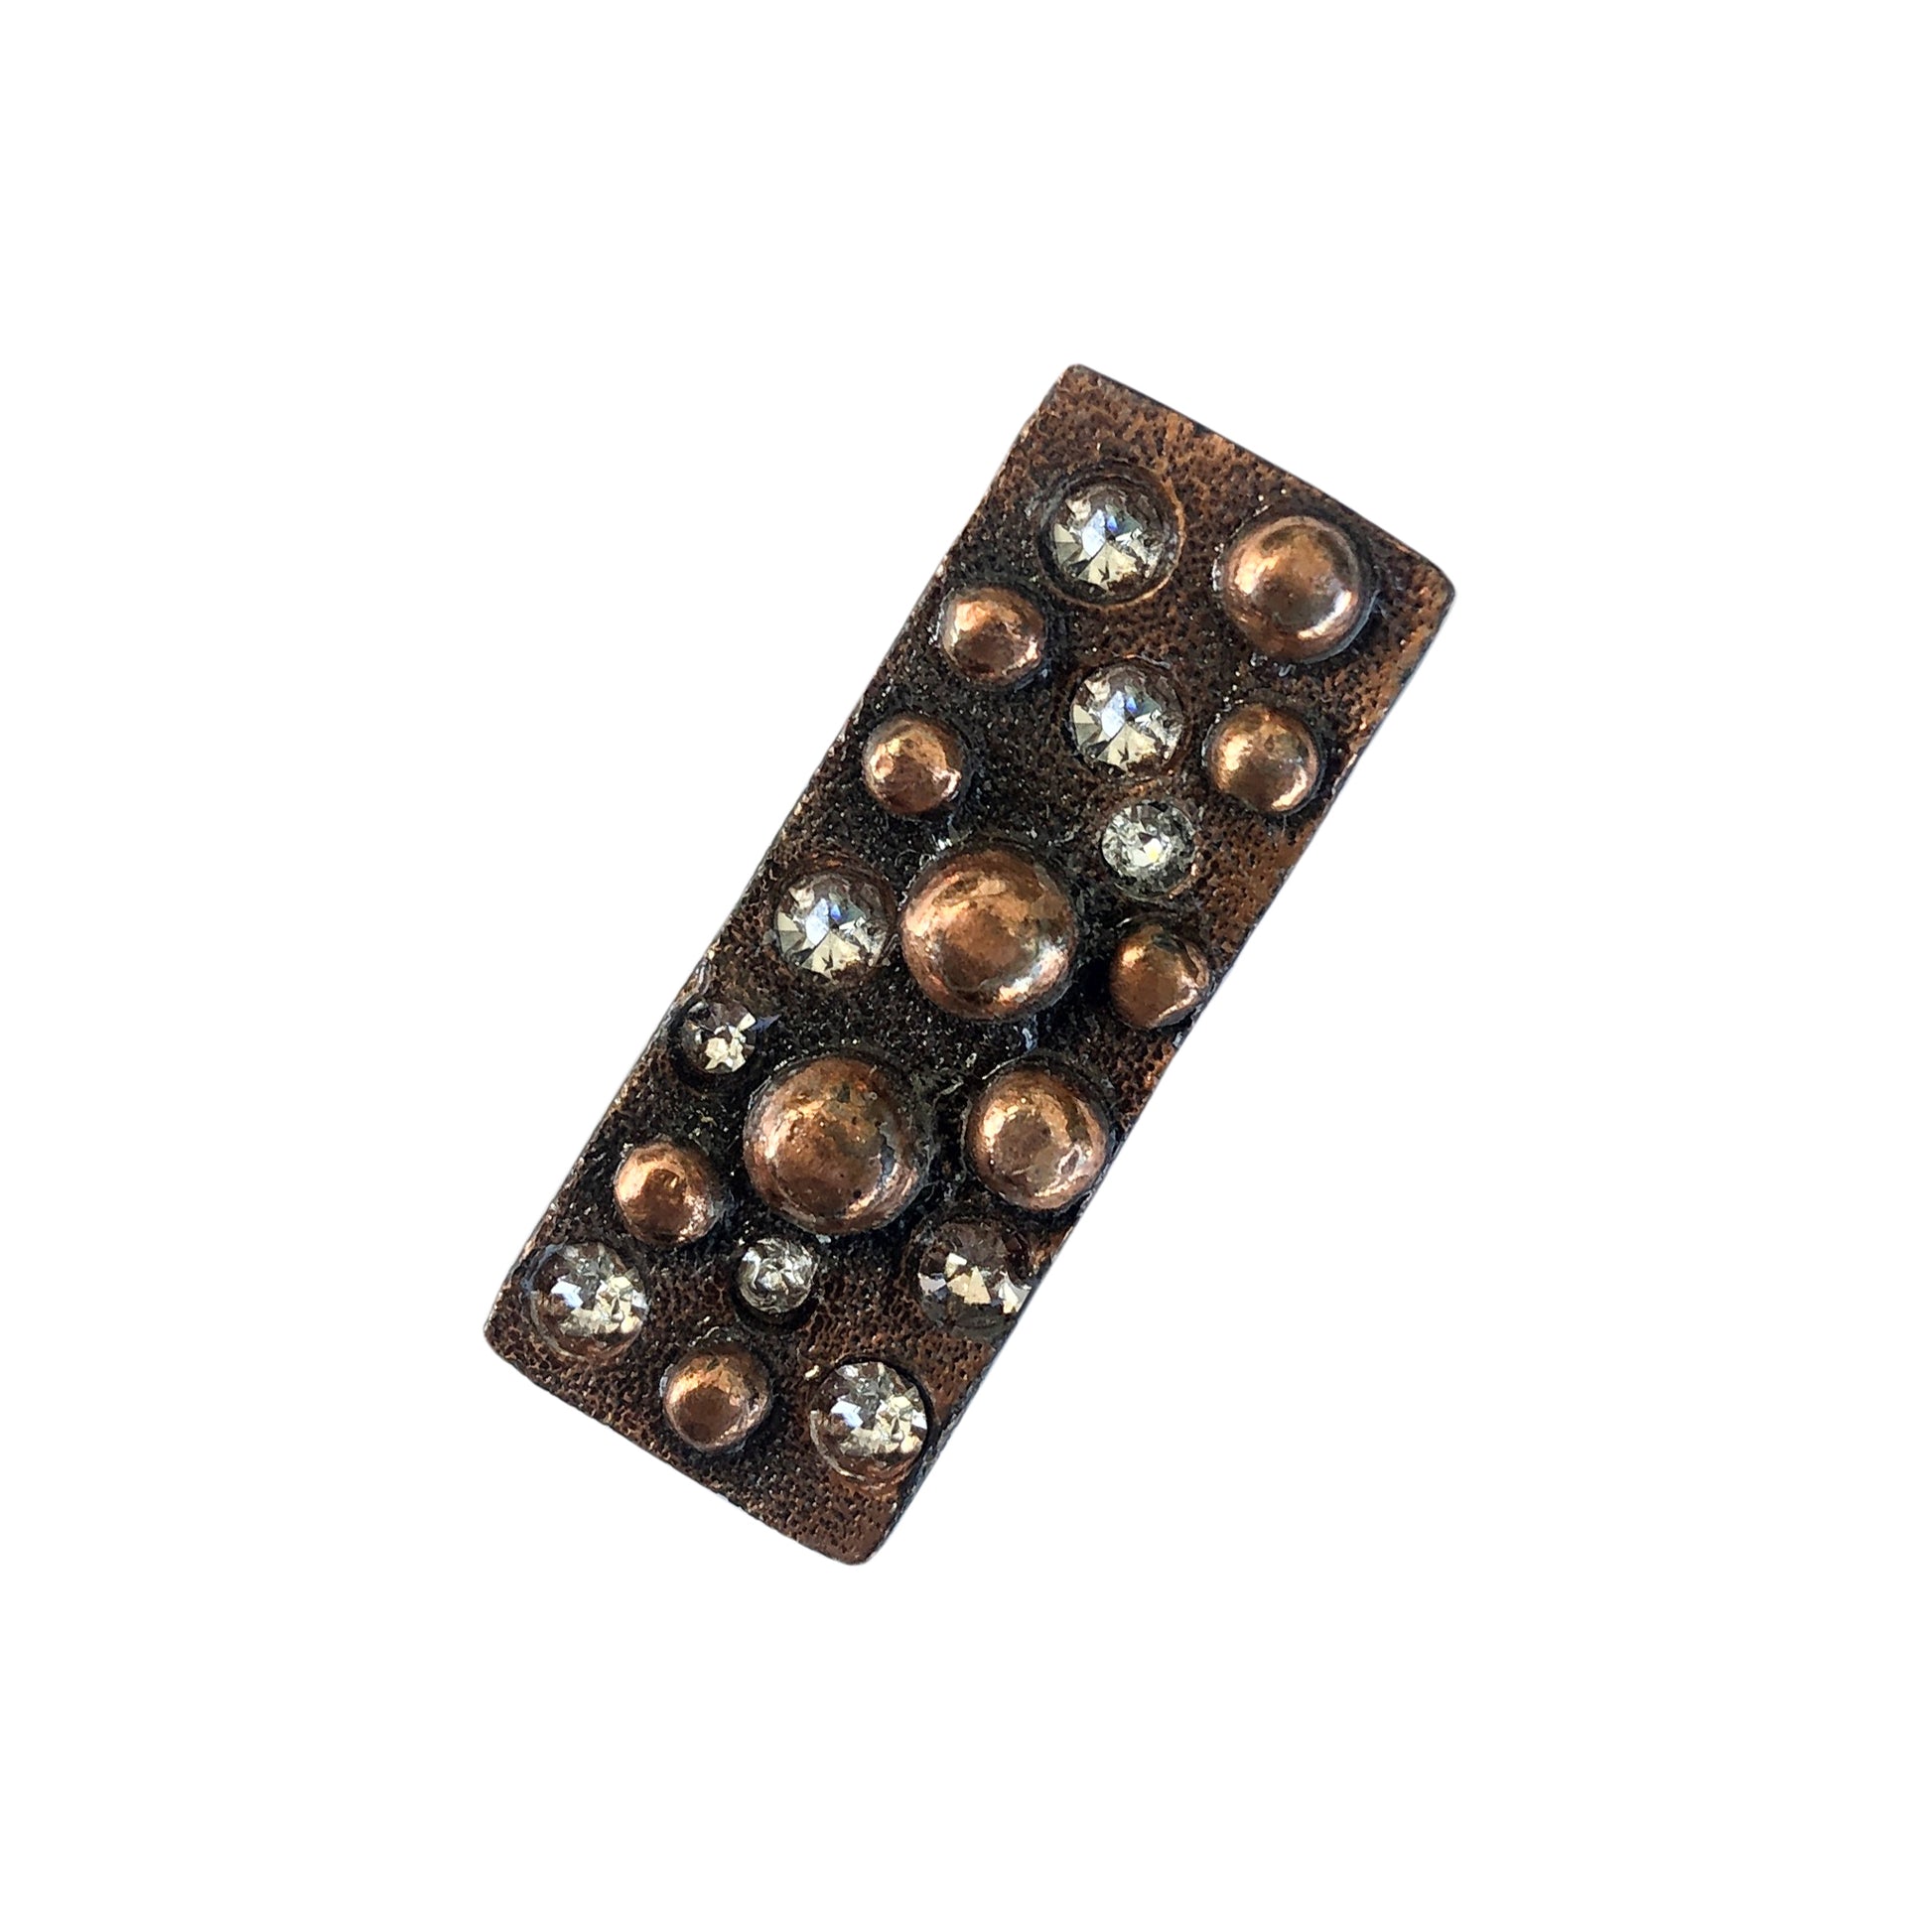 1-1/4" x 1/2" CI Copper bar concho with frost background, copper spots, and clear crystals (set of 4). 